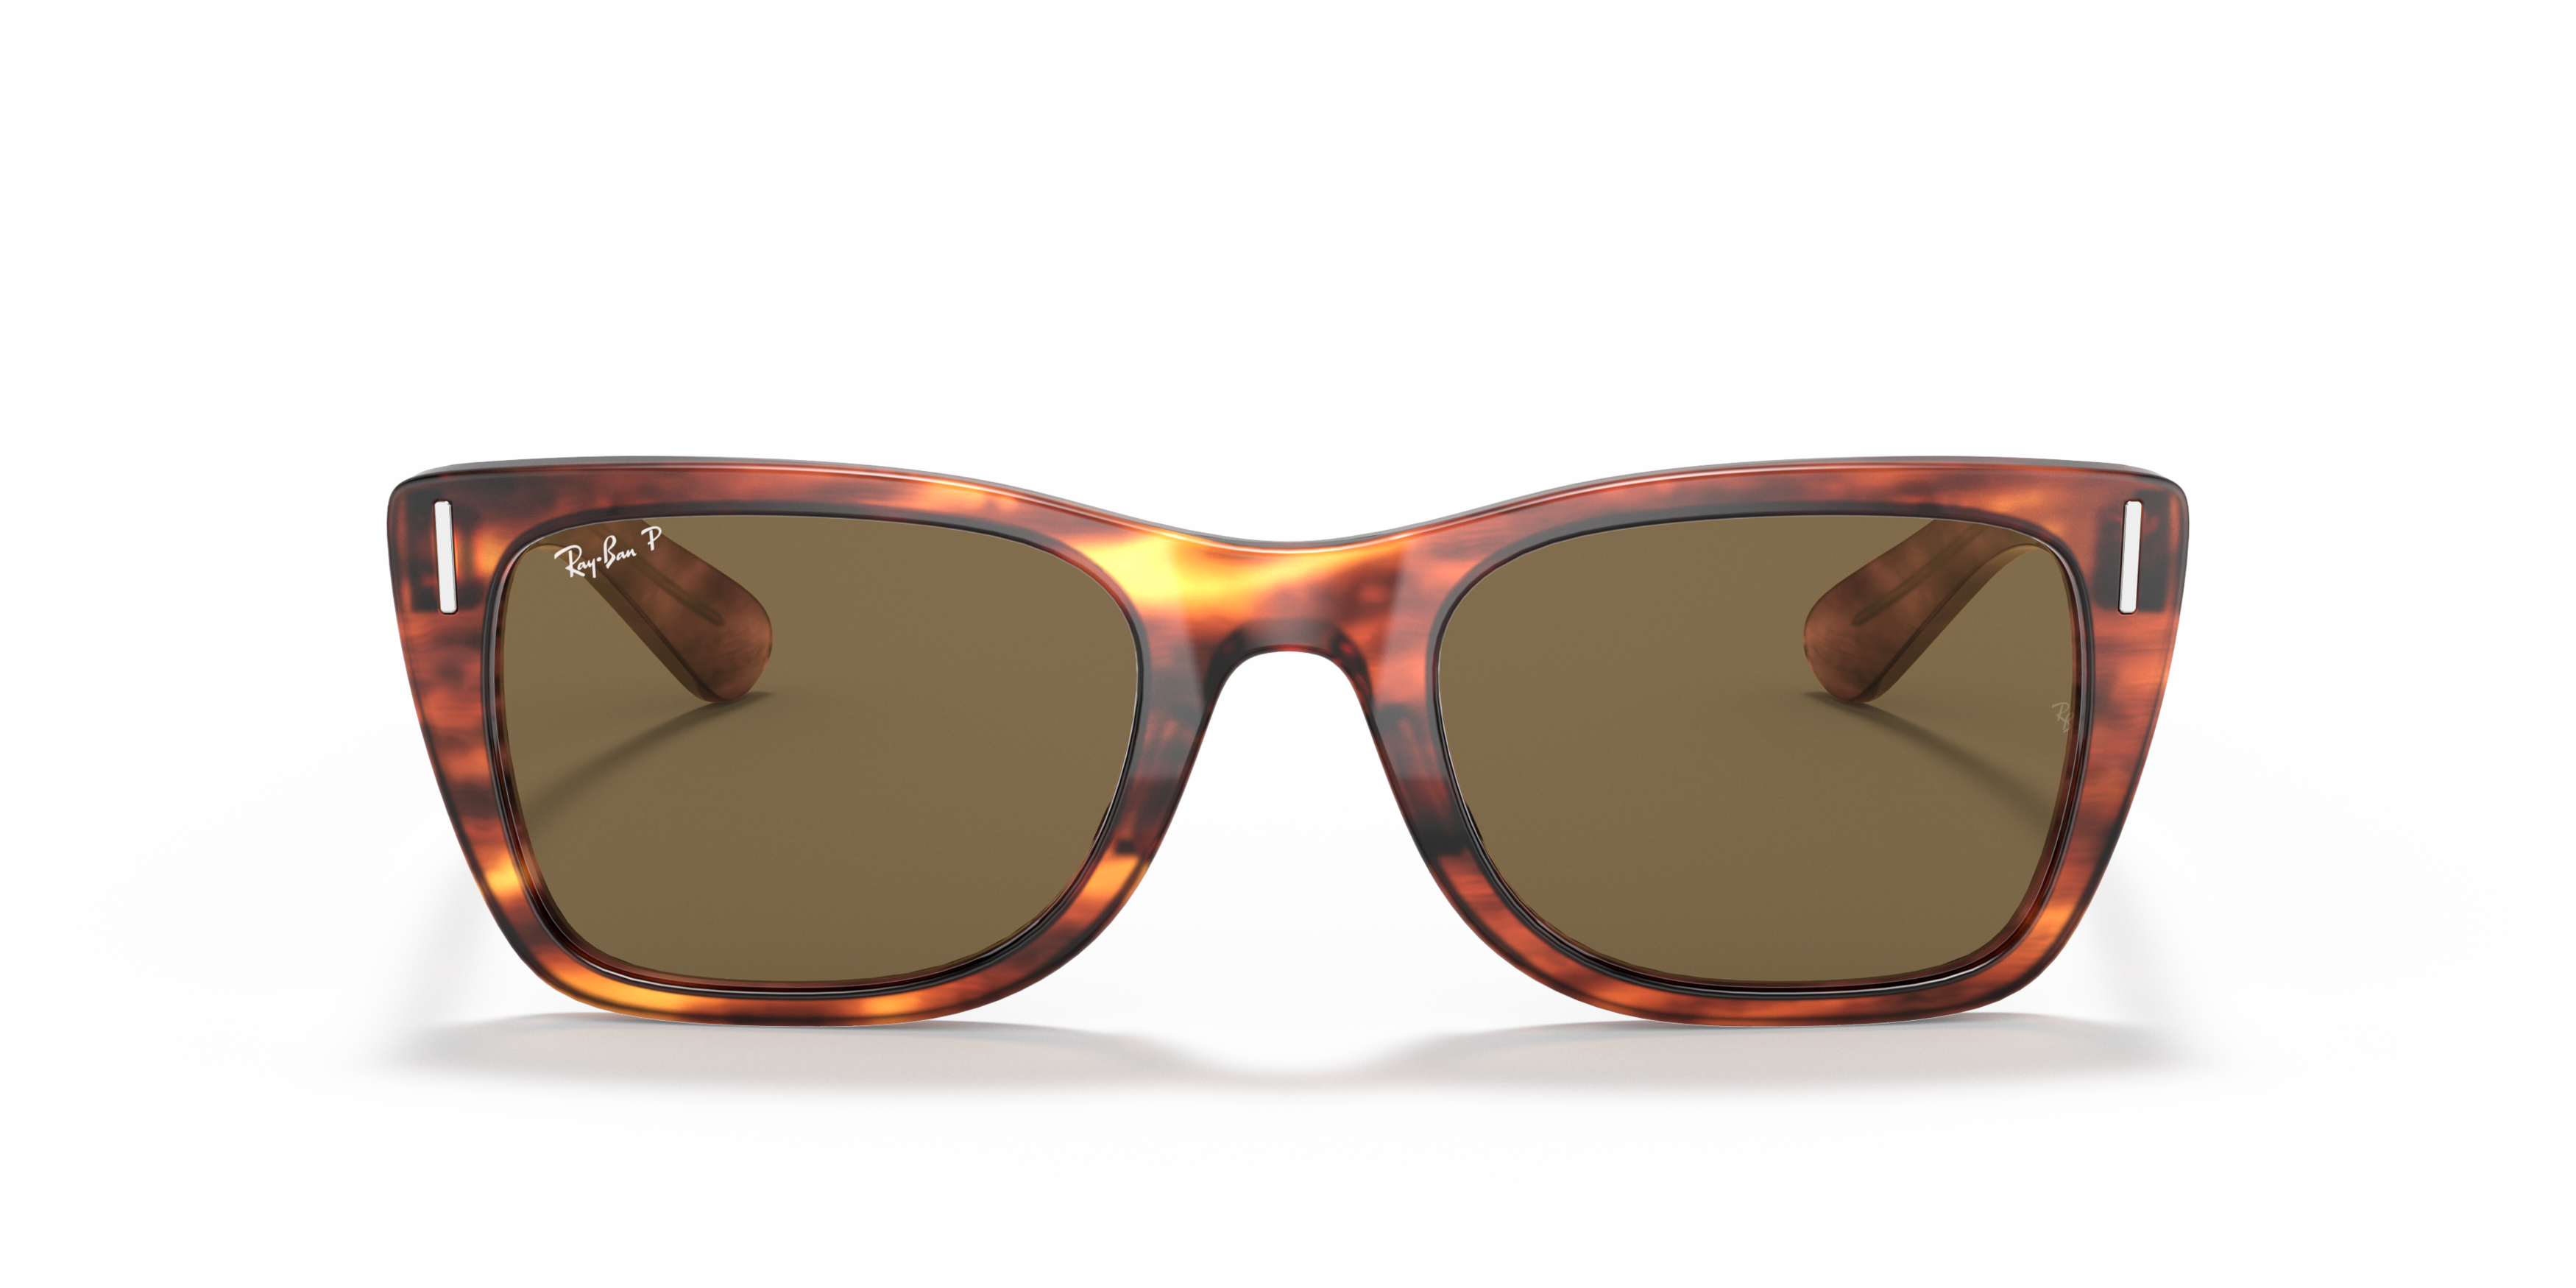 [products.image.front] Ray-Ban Caribbean RB2248 954/57